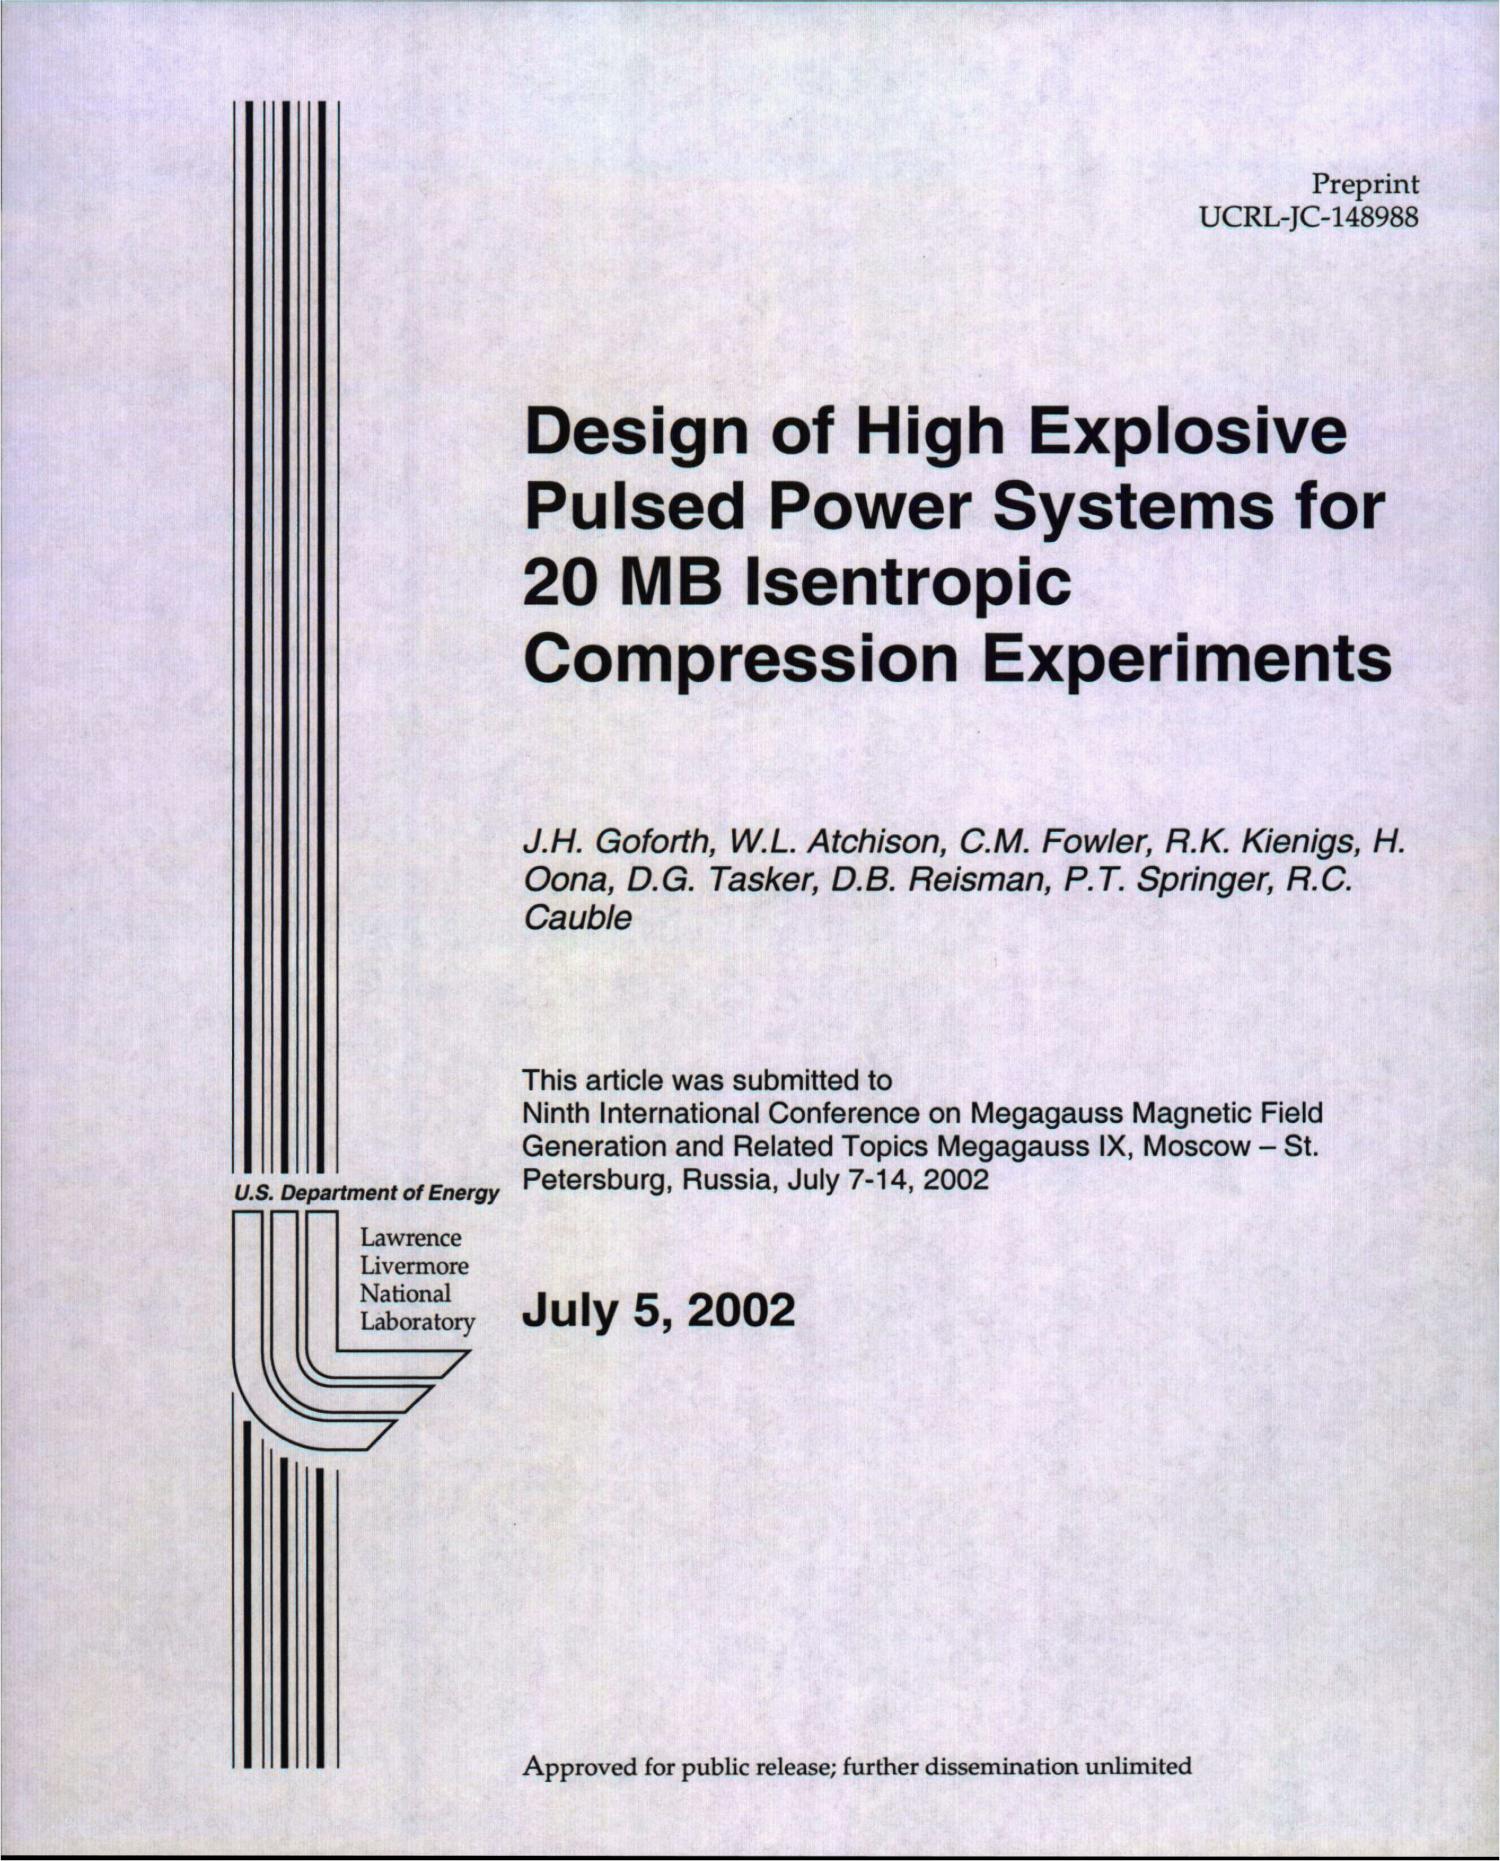 Design of High Explosive Pulsed Power for 20 MB Isentropic Compression Experiments Digital Library